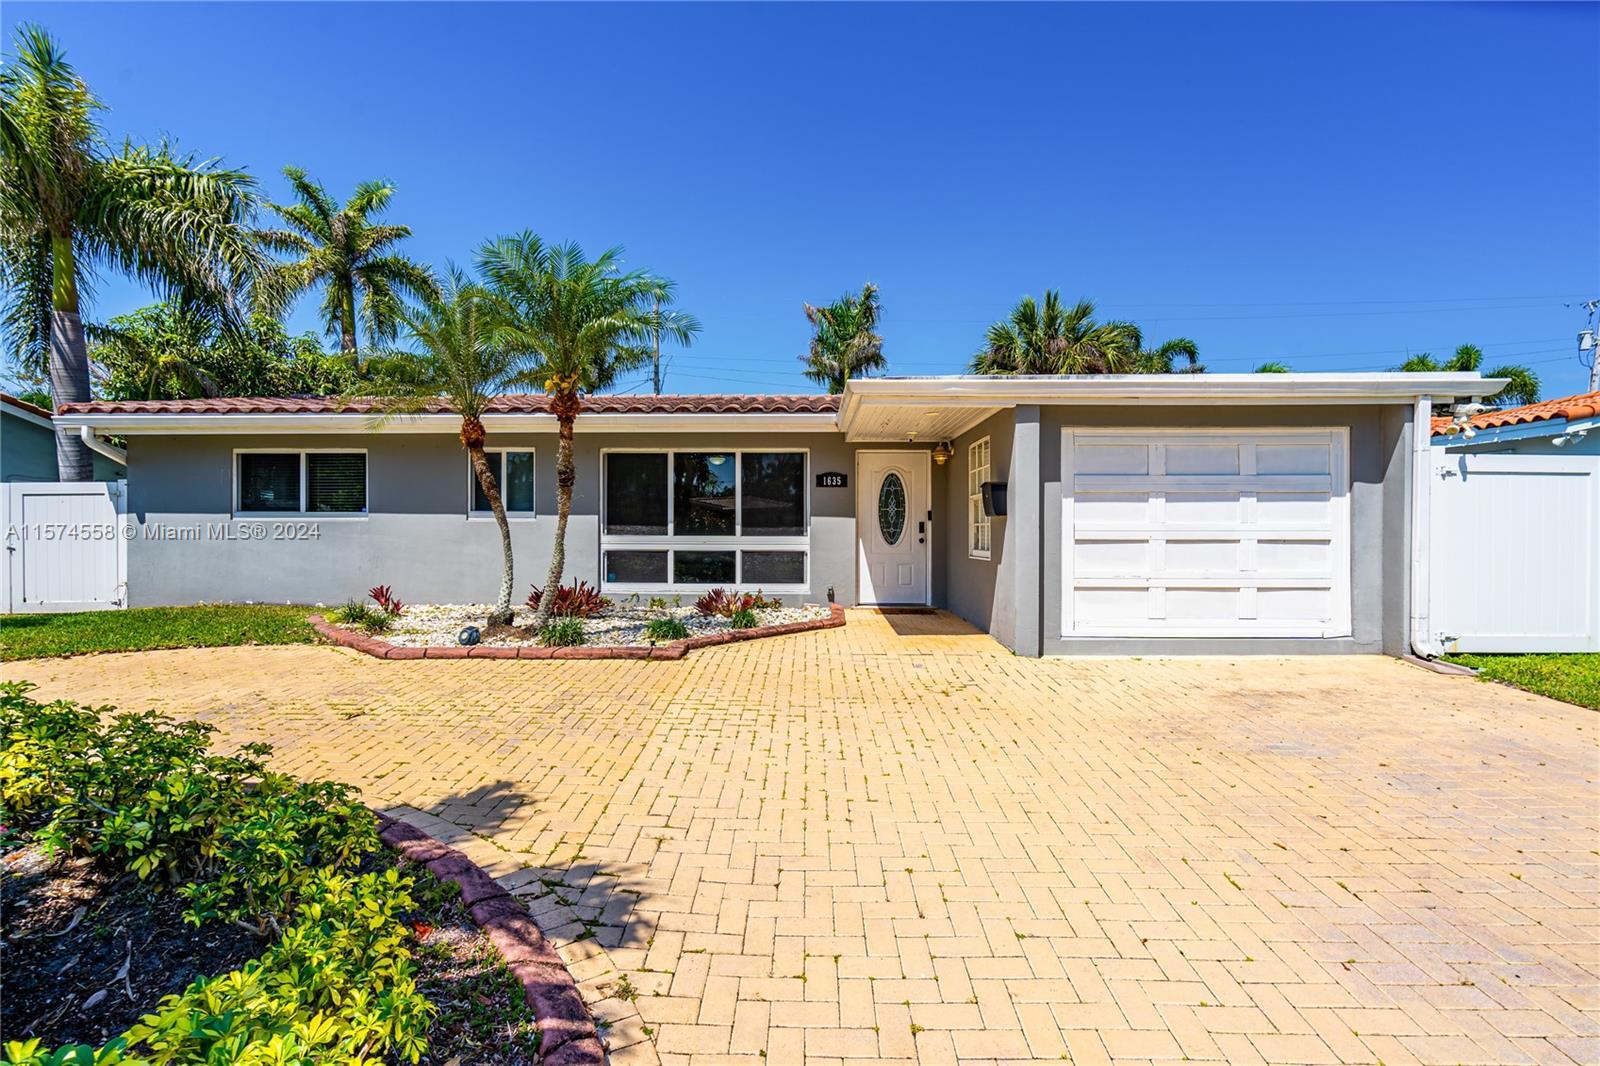 Welcome to your tropical paradise just minutes from the sandy shores of Deerfield Beach, Florida! Th